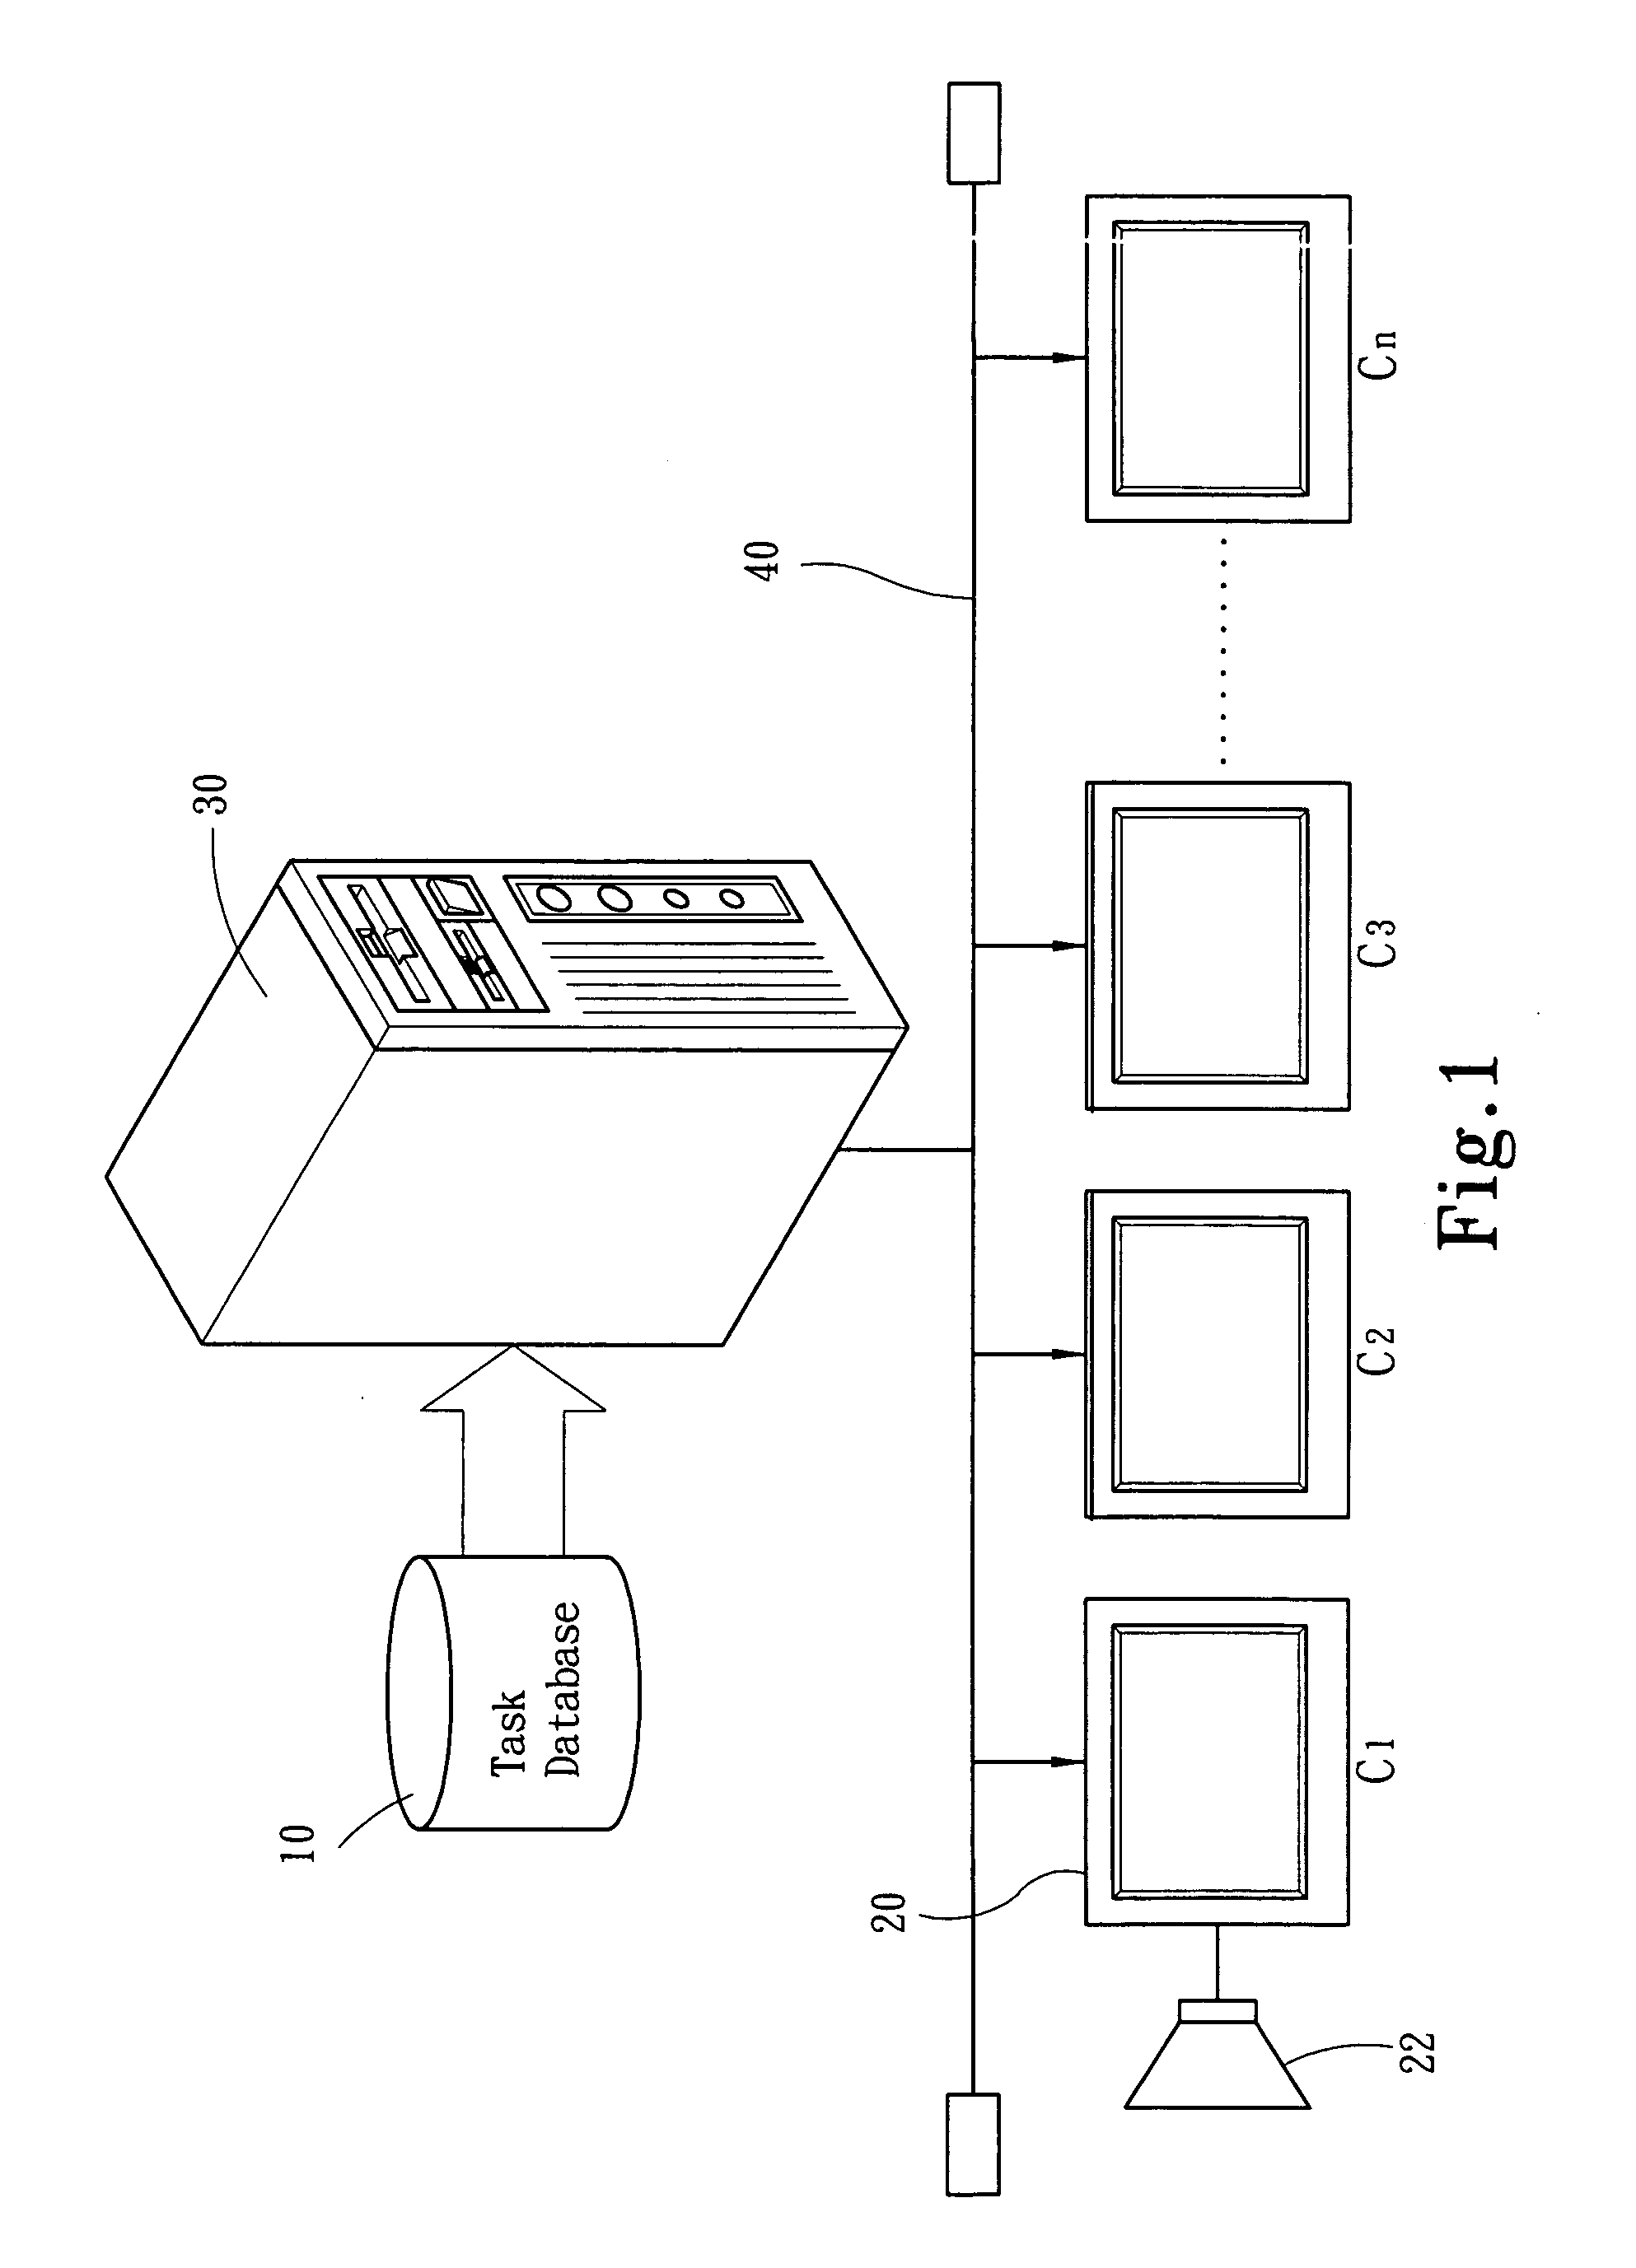 Support system for standard operation procedure